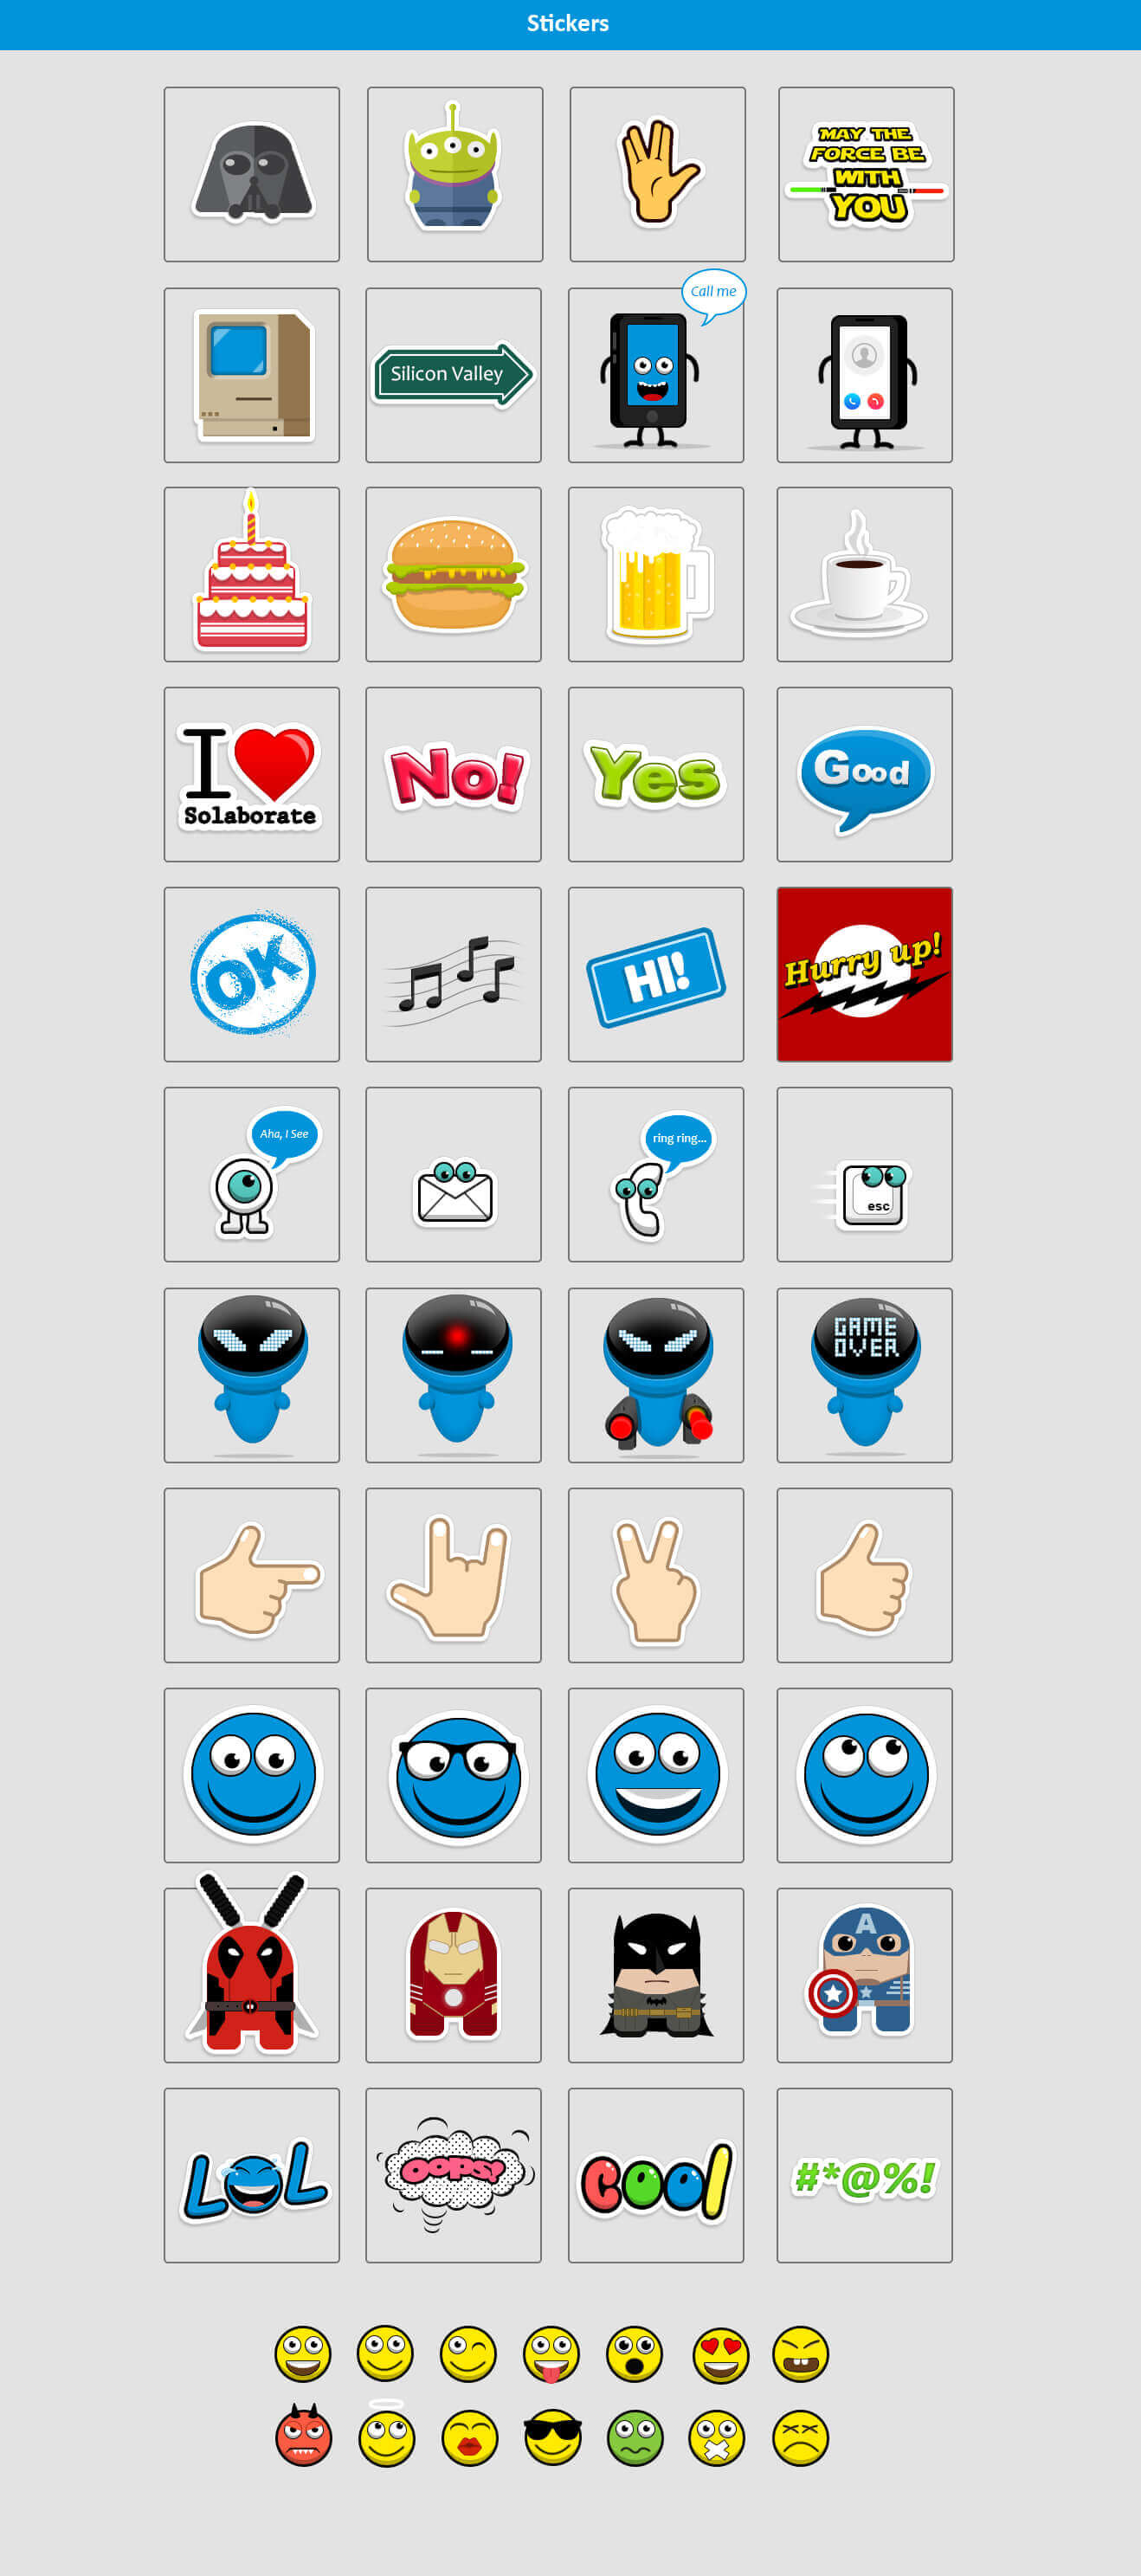 Chat stickers and smileys